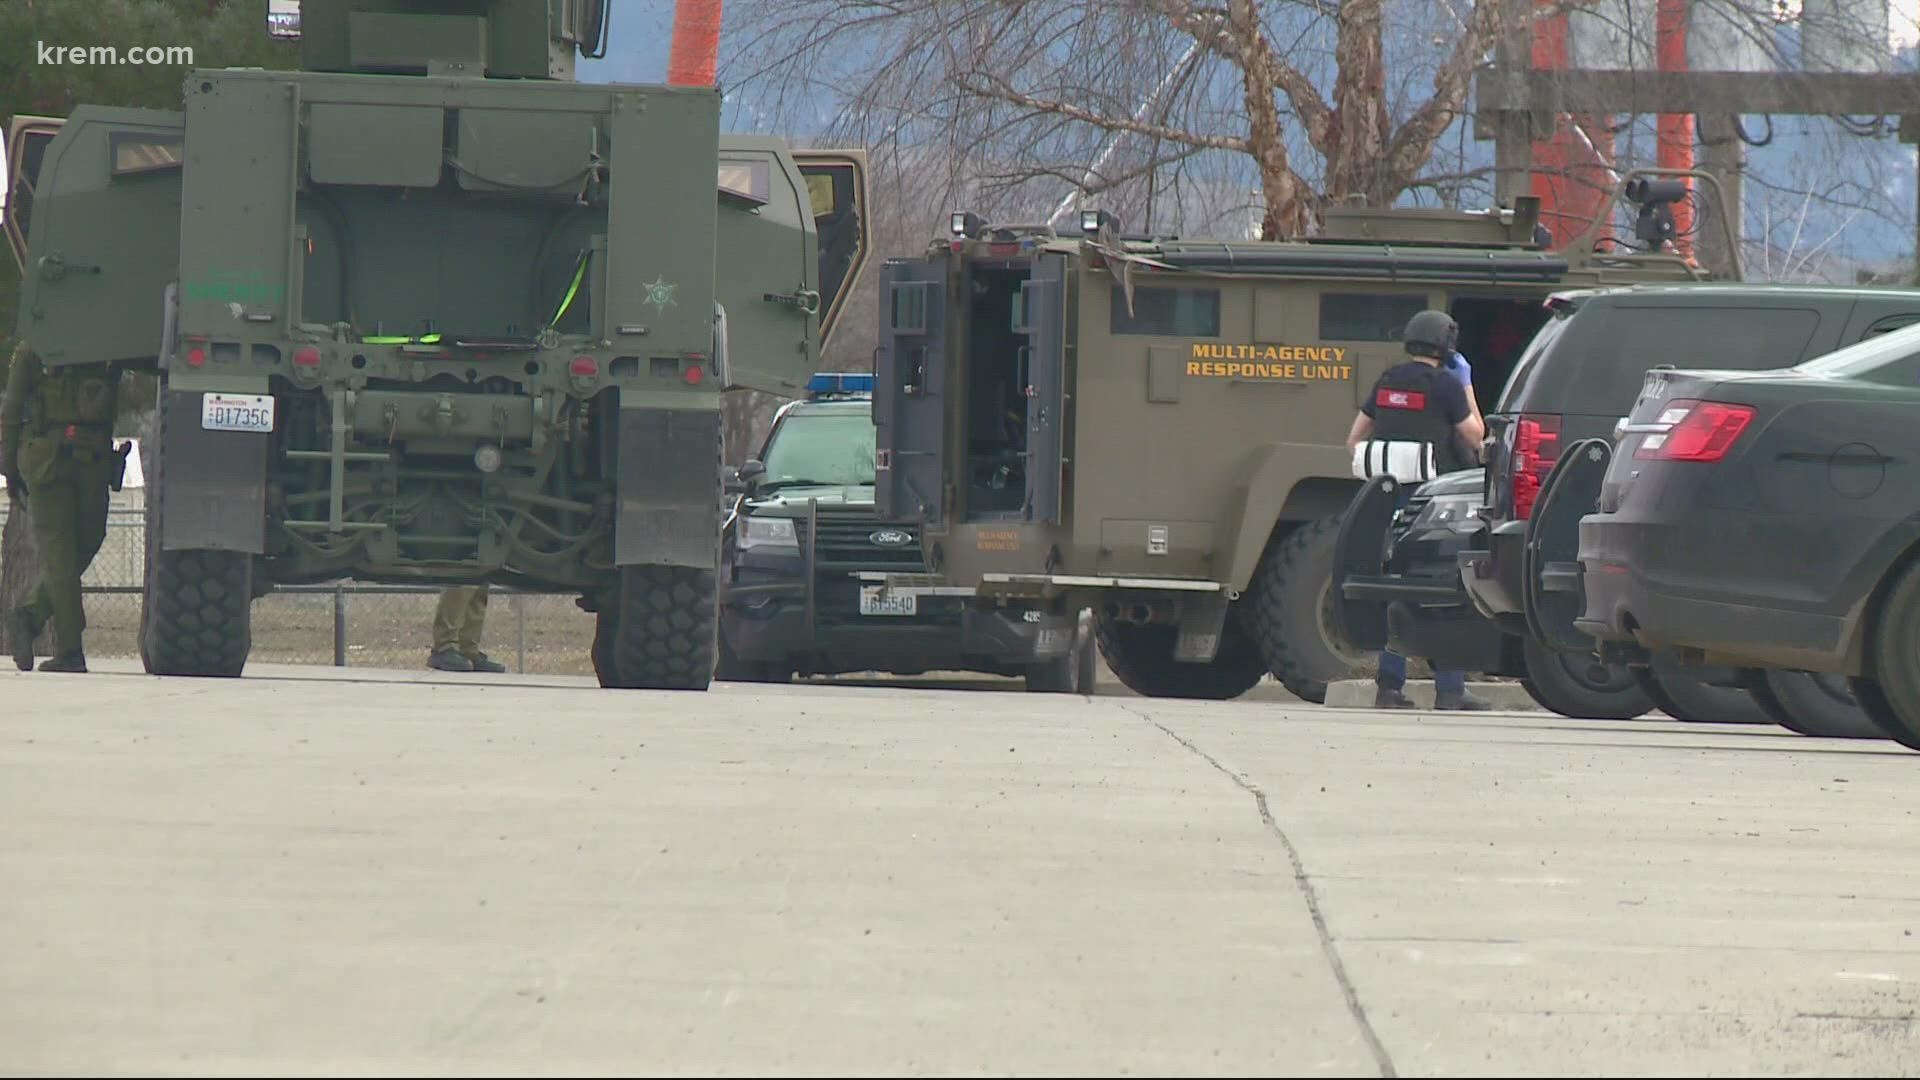 The standoff took place near Otis Orchards.